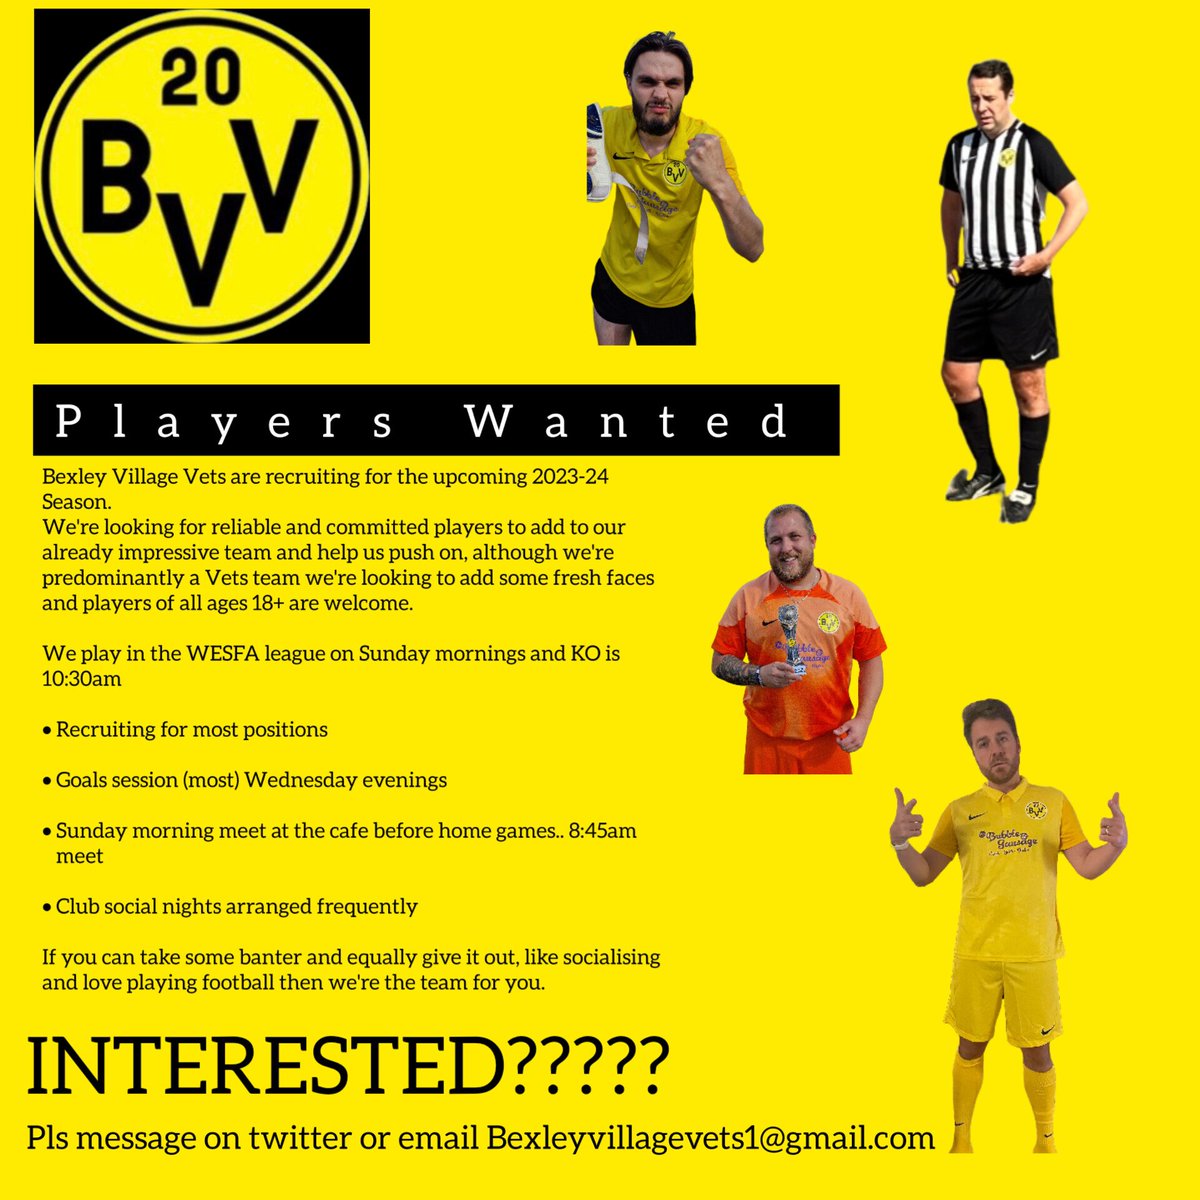 @WESFA_Football @purelyplayers @matchark_uk @PlayerWanted @Teamgrassroots_ @LondonFA @DownToPlay_App @findaplayer #Recruiting #playersneeded #playerwanted #recruitment #players #allwelcome #grassrootsfootball #sundayleague #DMus #weneedyou 
🙌🏼⚽️⚽️⚽️⚽️⚽️⚽️⚽️⚽️👍🏼